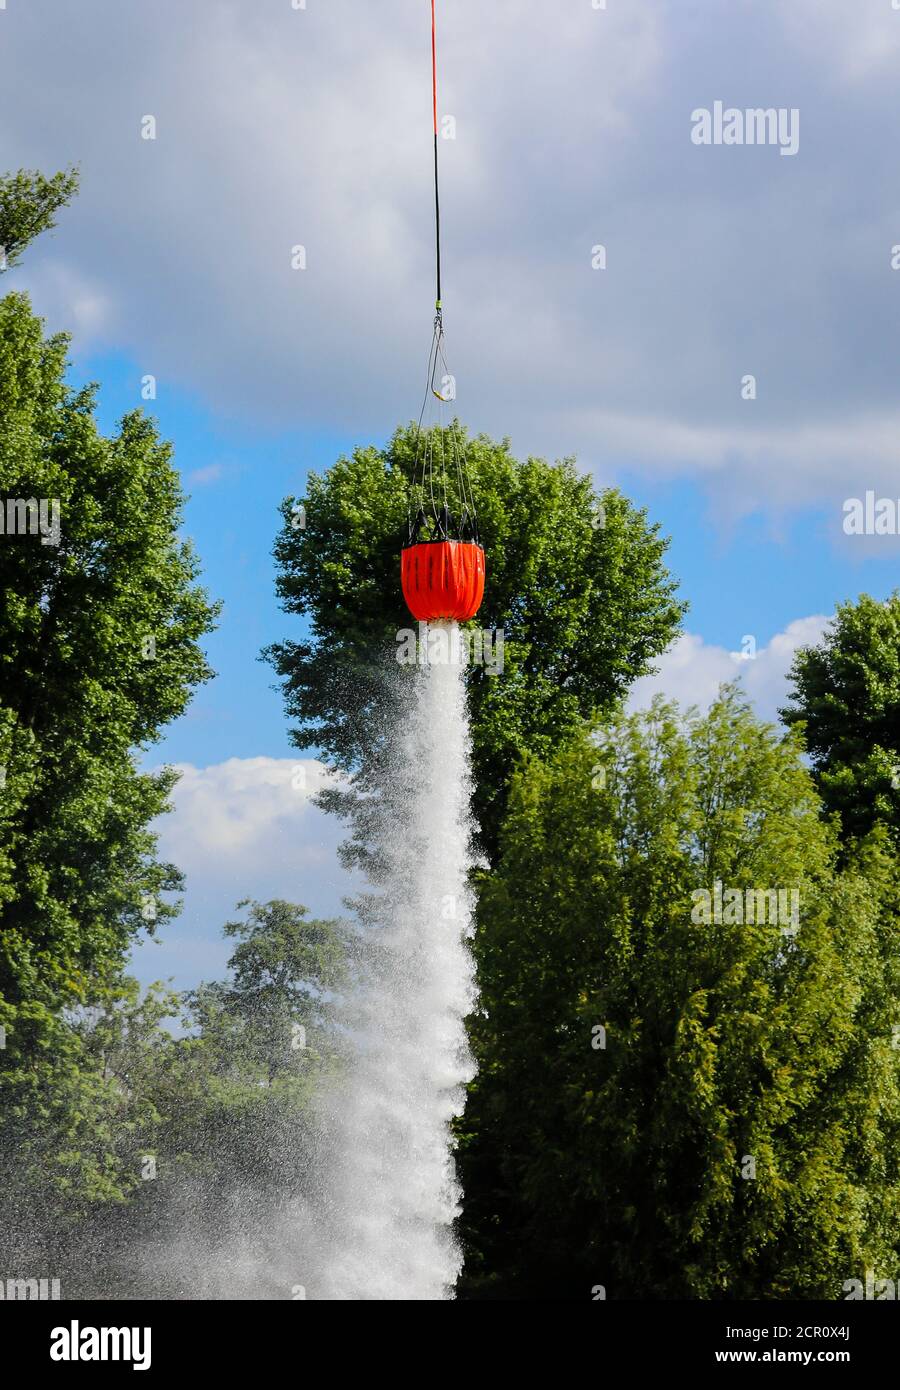 Police helicopter during an operational exercise with the BAMBI BUCKET extinguishing water tank, Düsseldorf, North Rhine-Westphalia, Germany Stock Photo